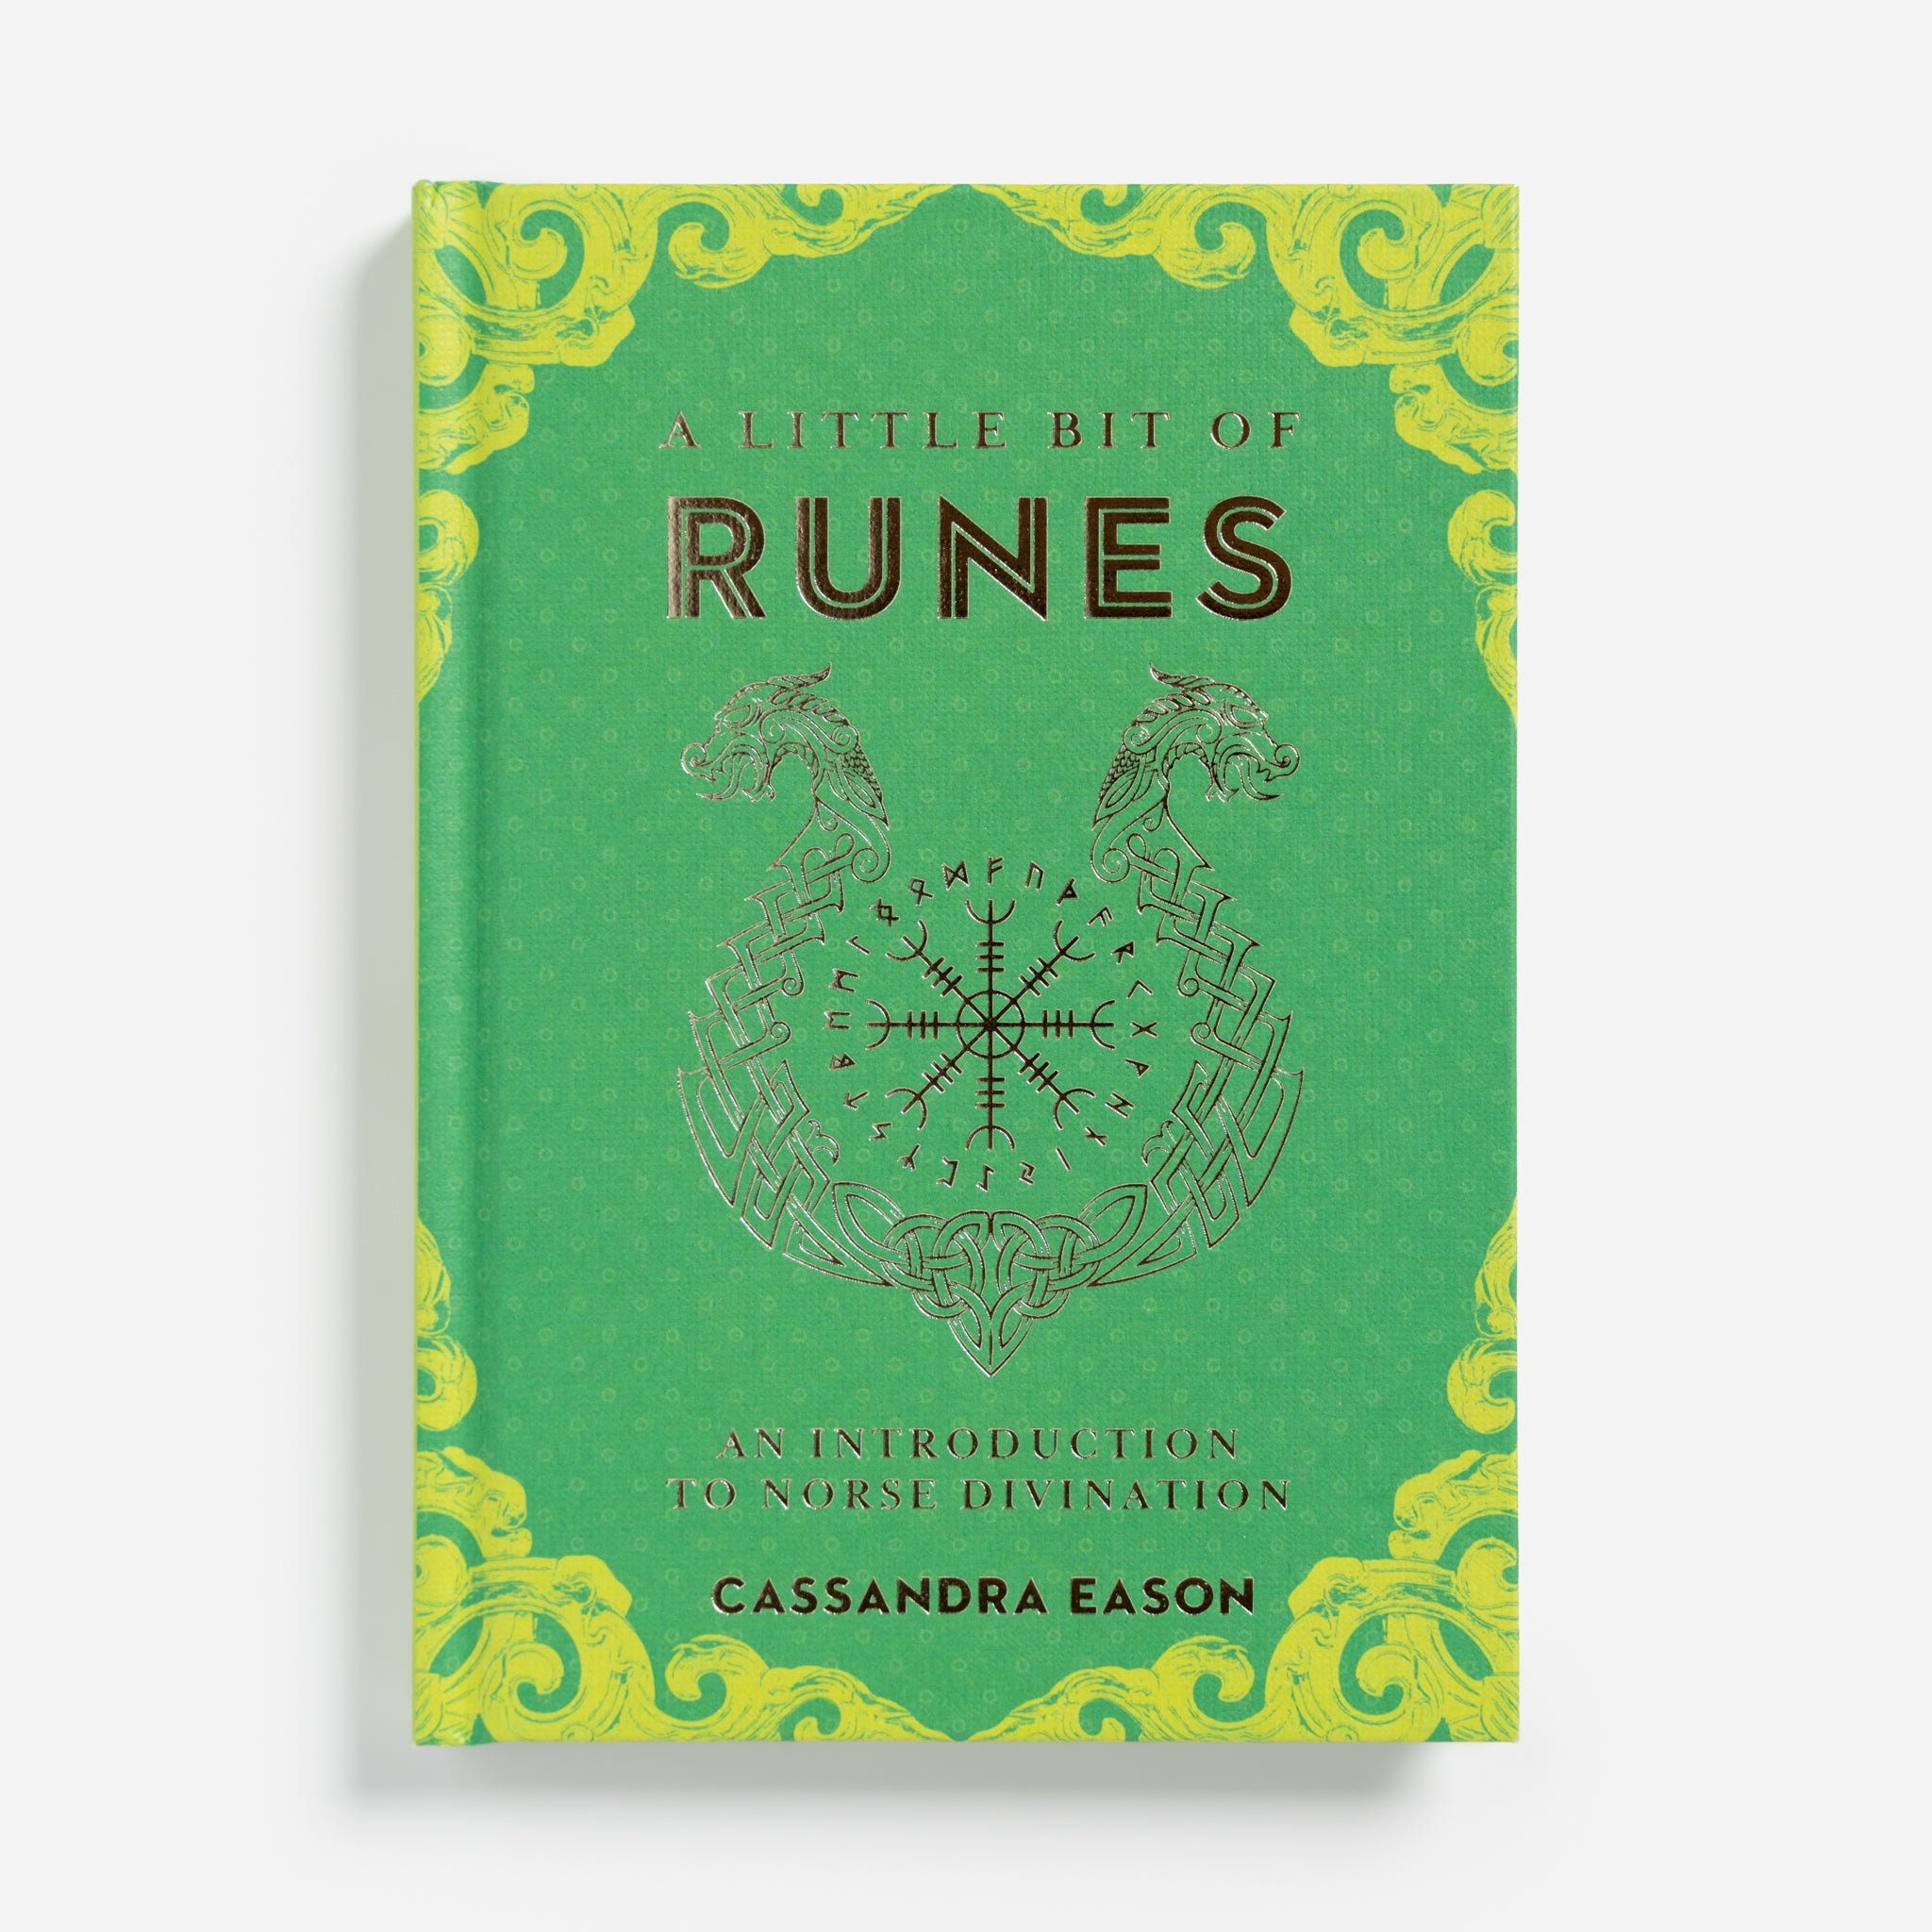 Little Bit of Runes: Introduction to Norse Divination by Cassandra Eason